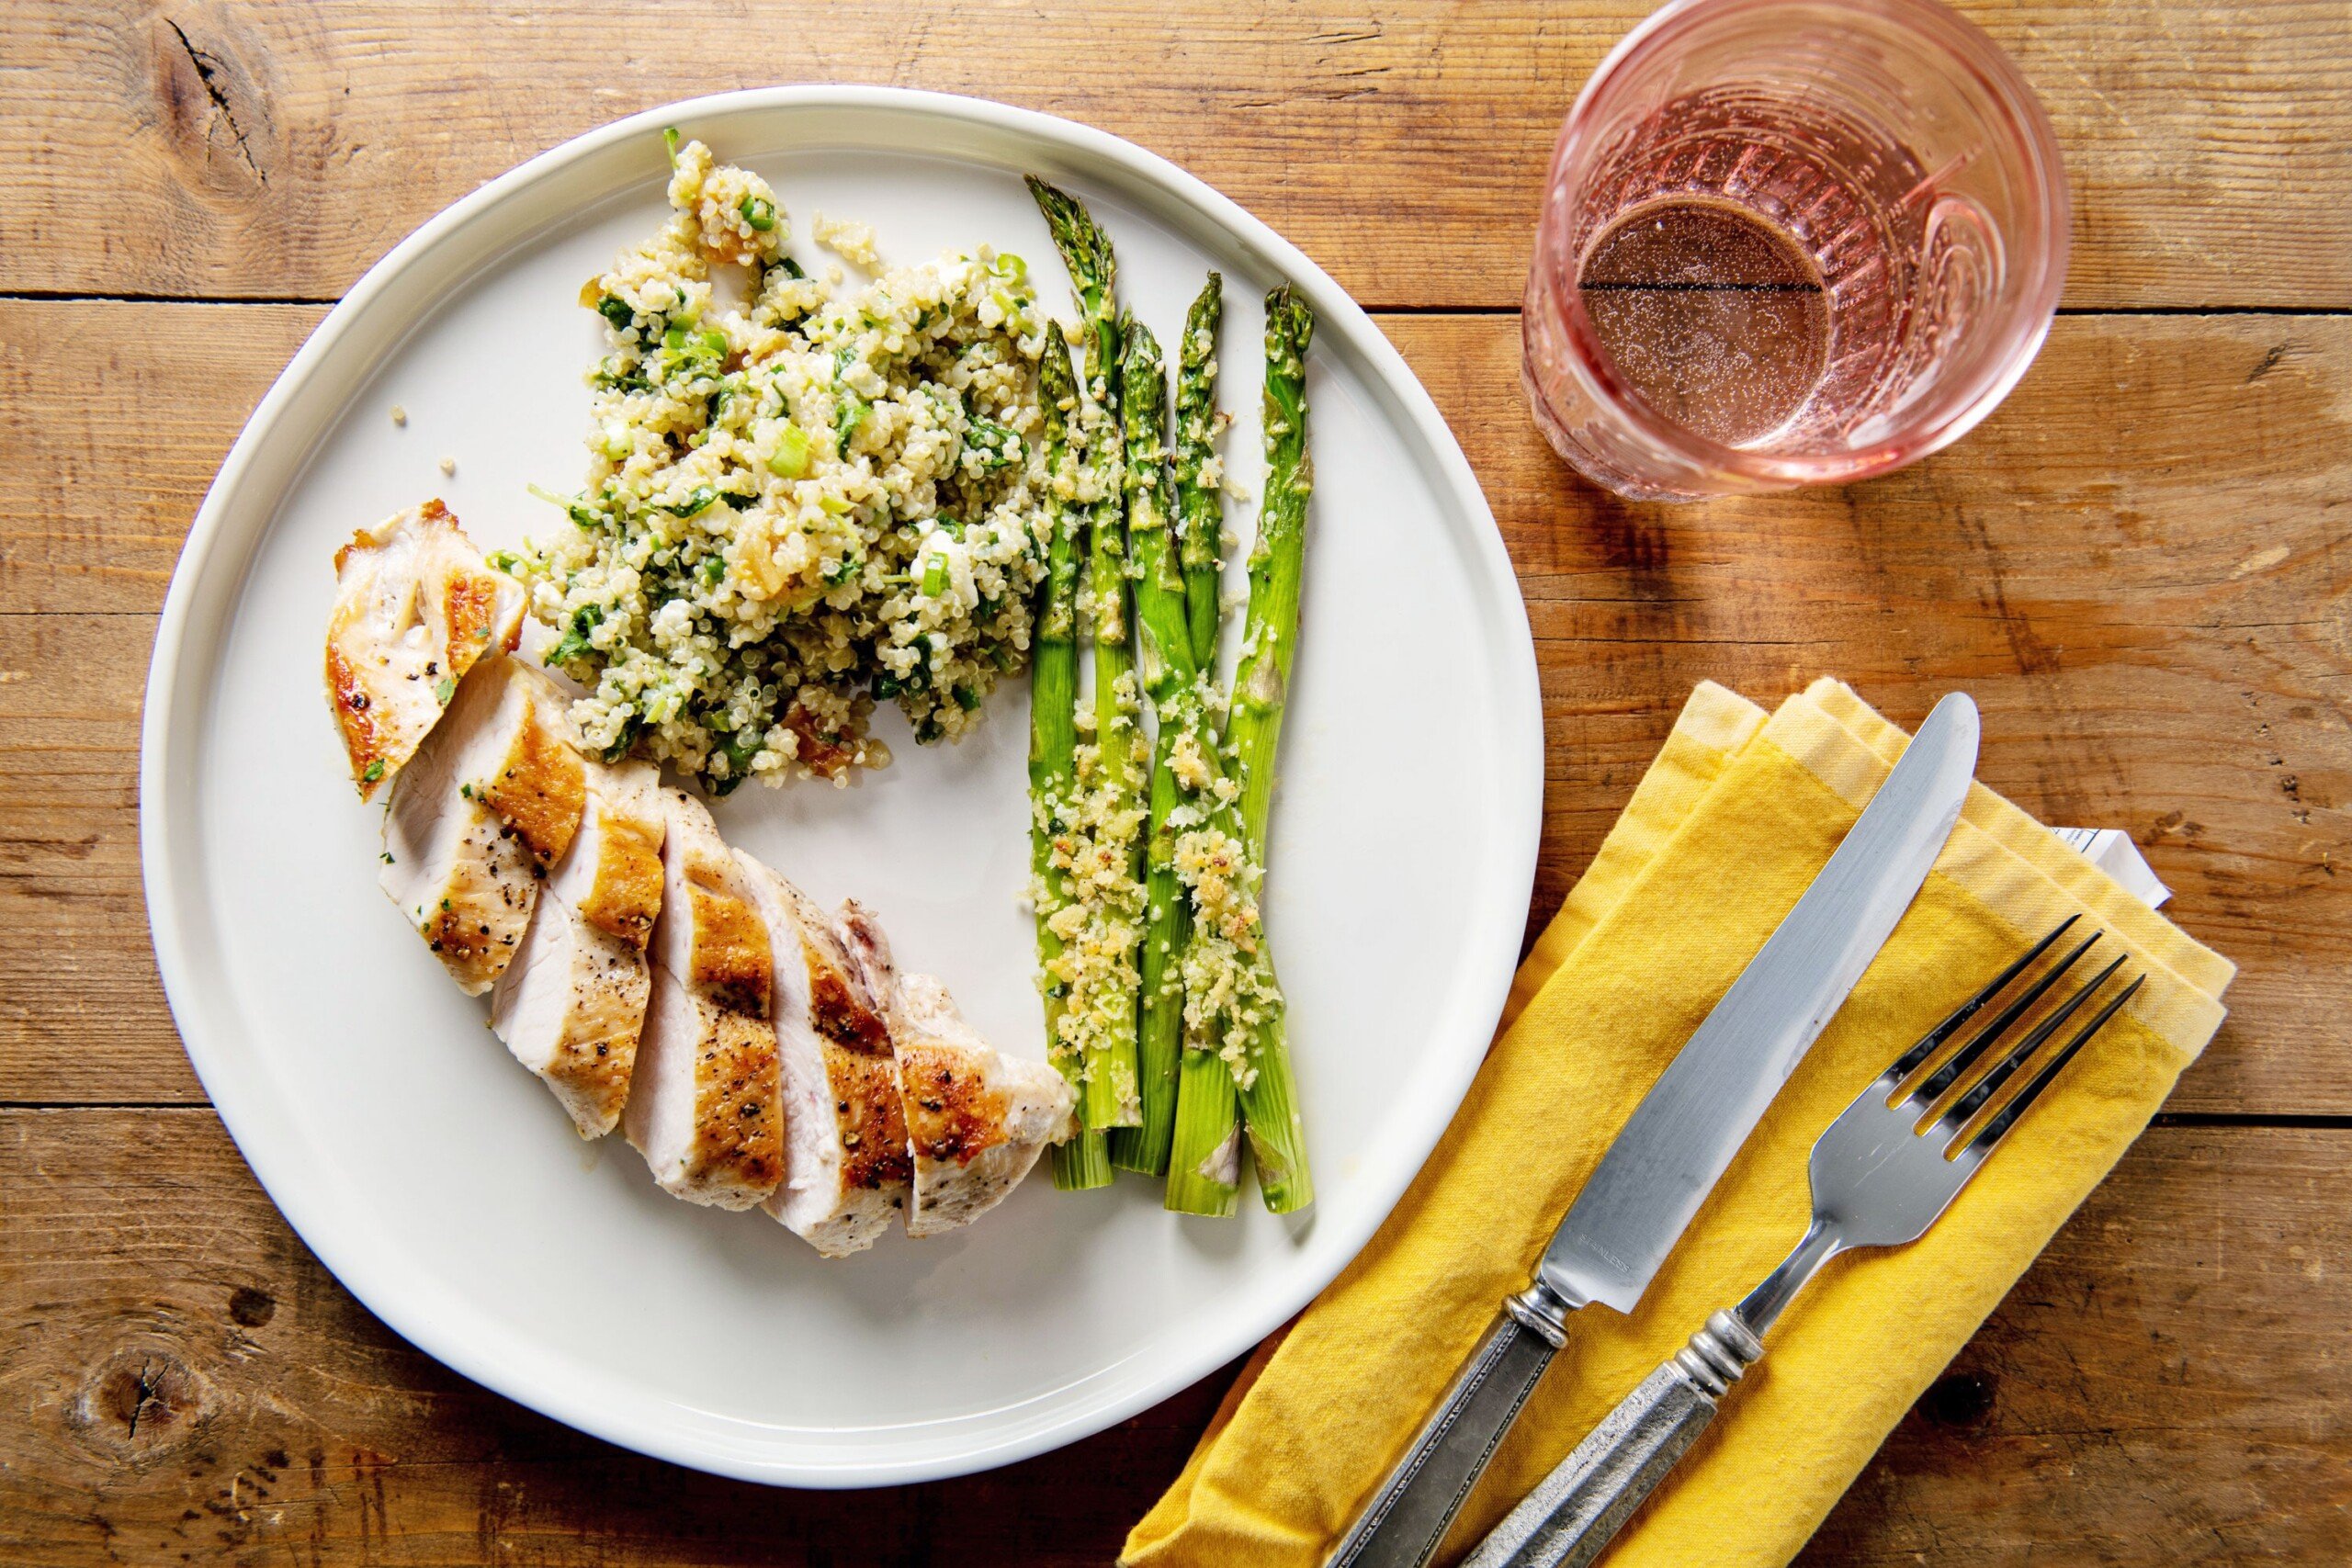 Garlicky Roasted Asparagus with Parmesan on plate with chicken and rice.